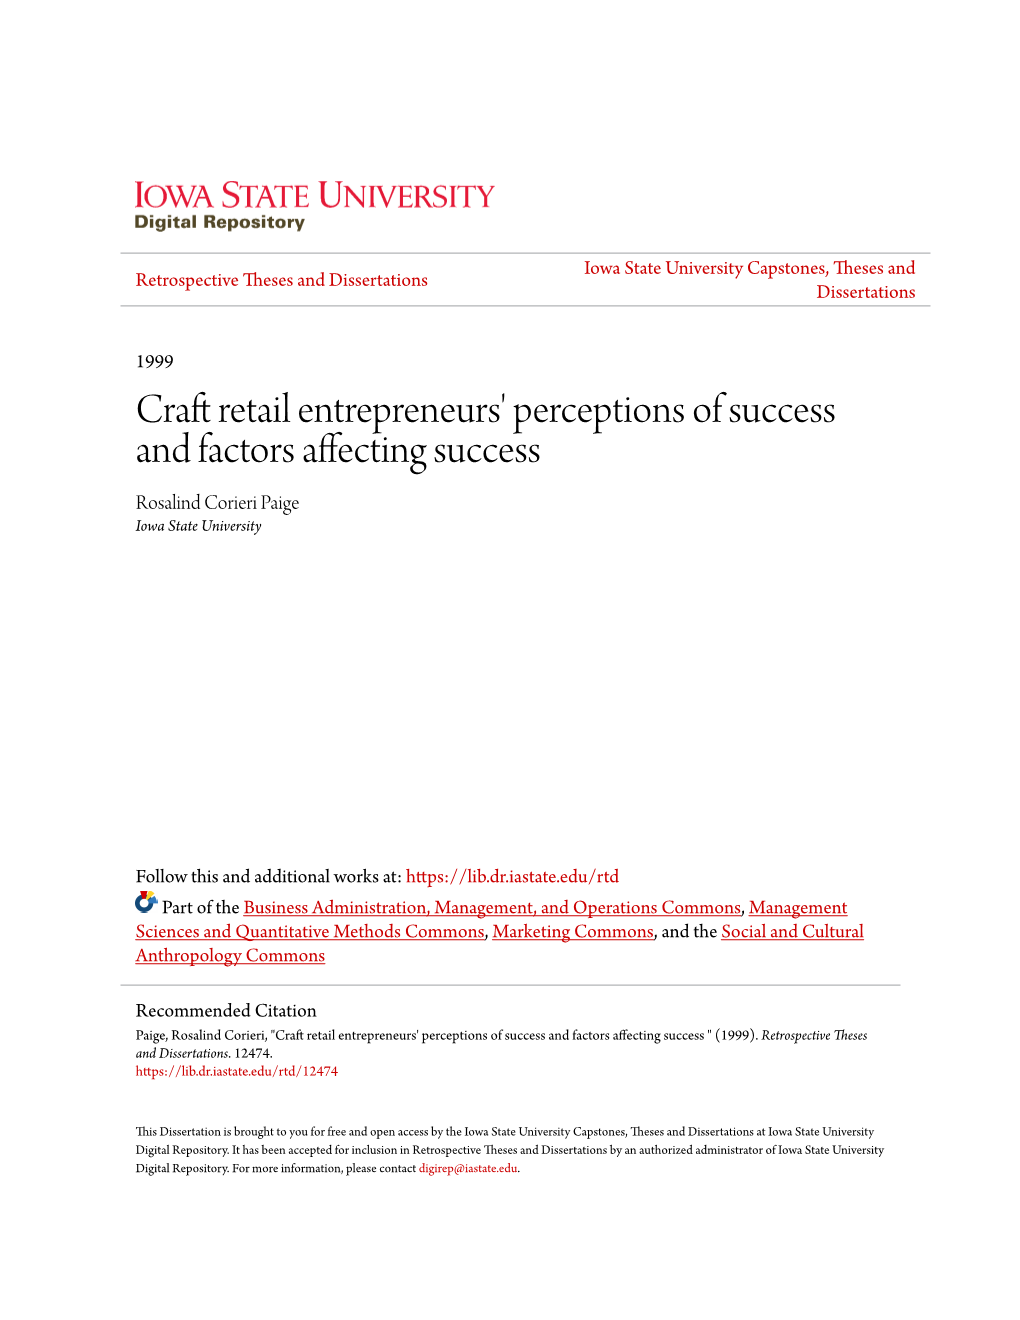 Craft Retail Entrepreneurs' Perceptions of Success and Factors Affecting